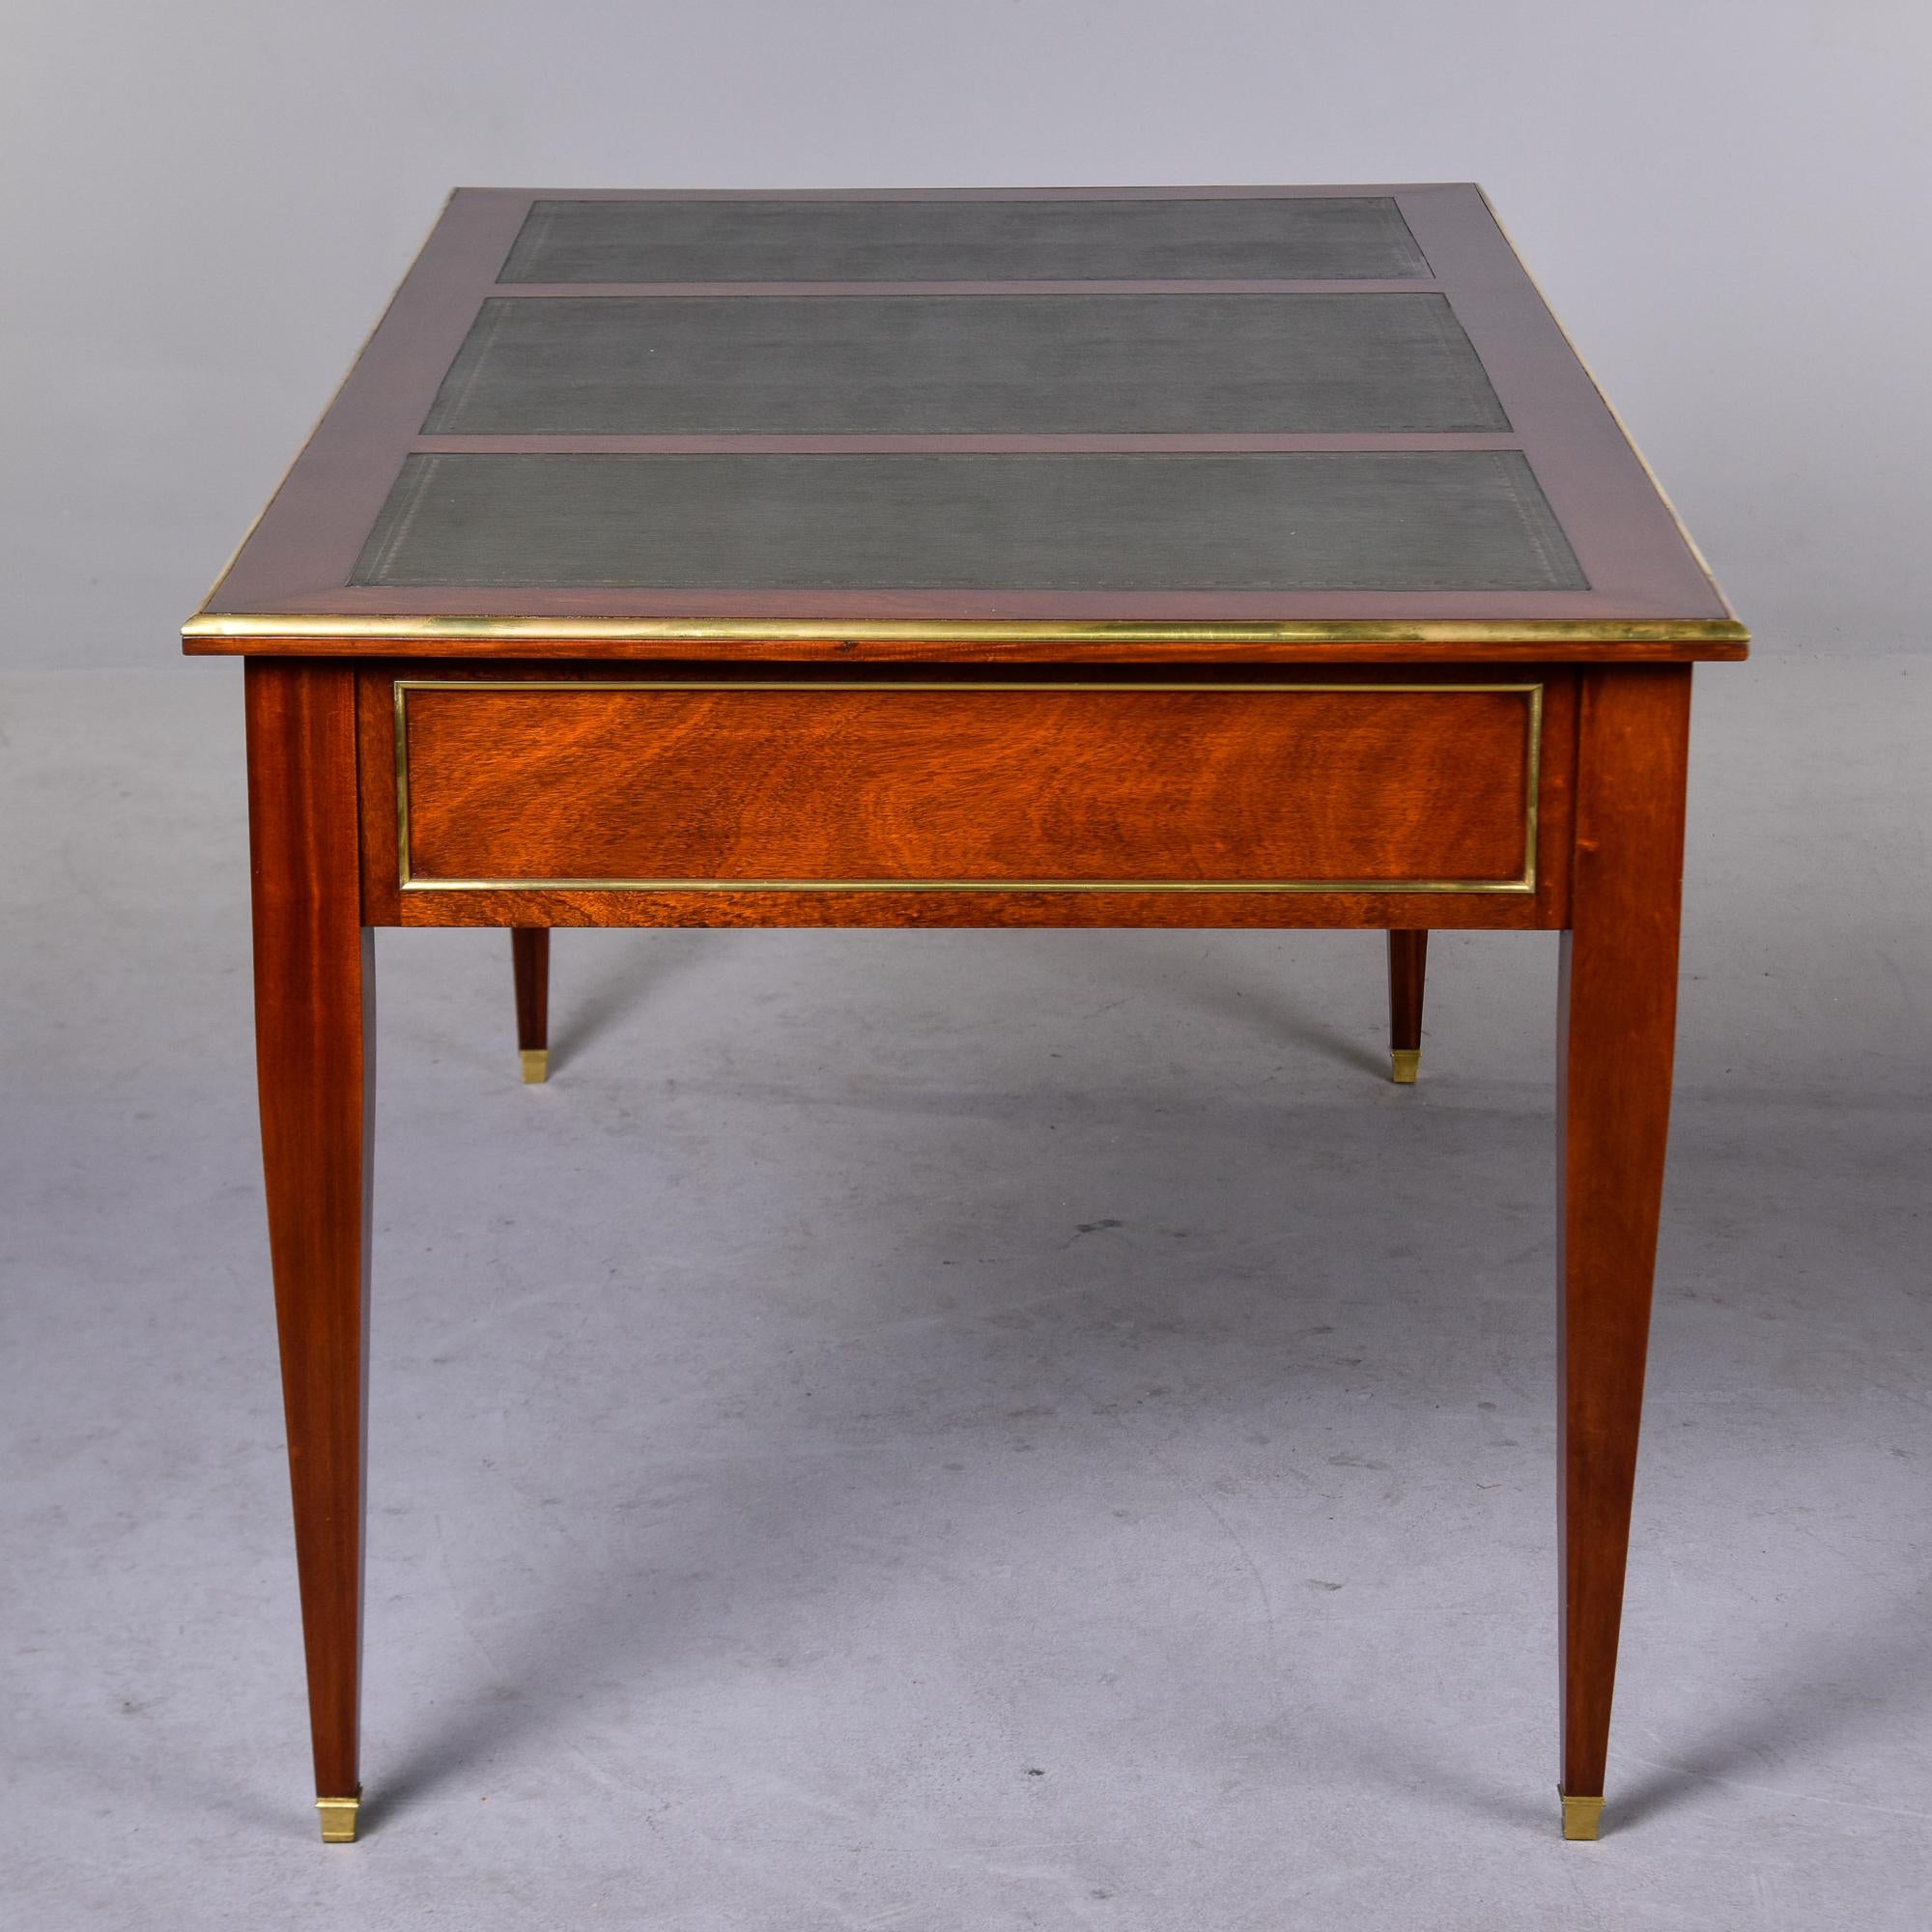 Early 19th Century Louis XVI Style Large Mahogany Desk with Green Leather Top For Sale 2